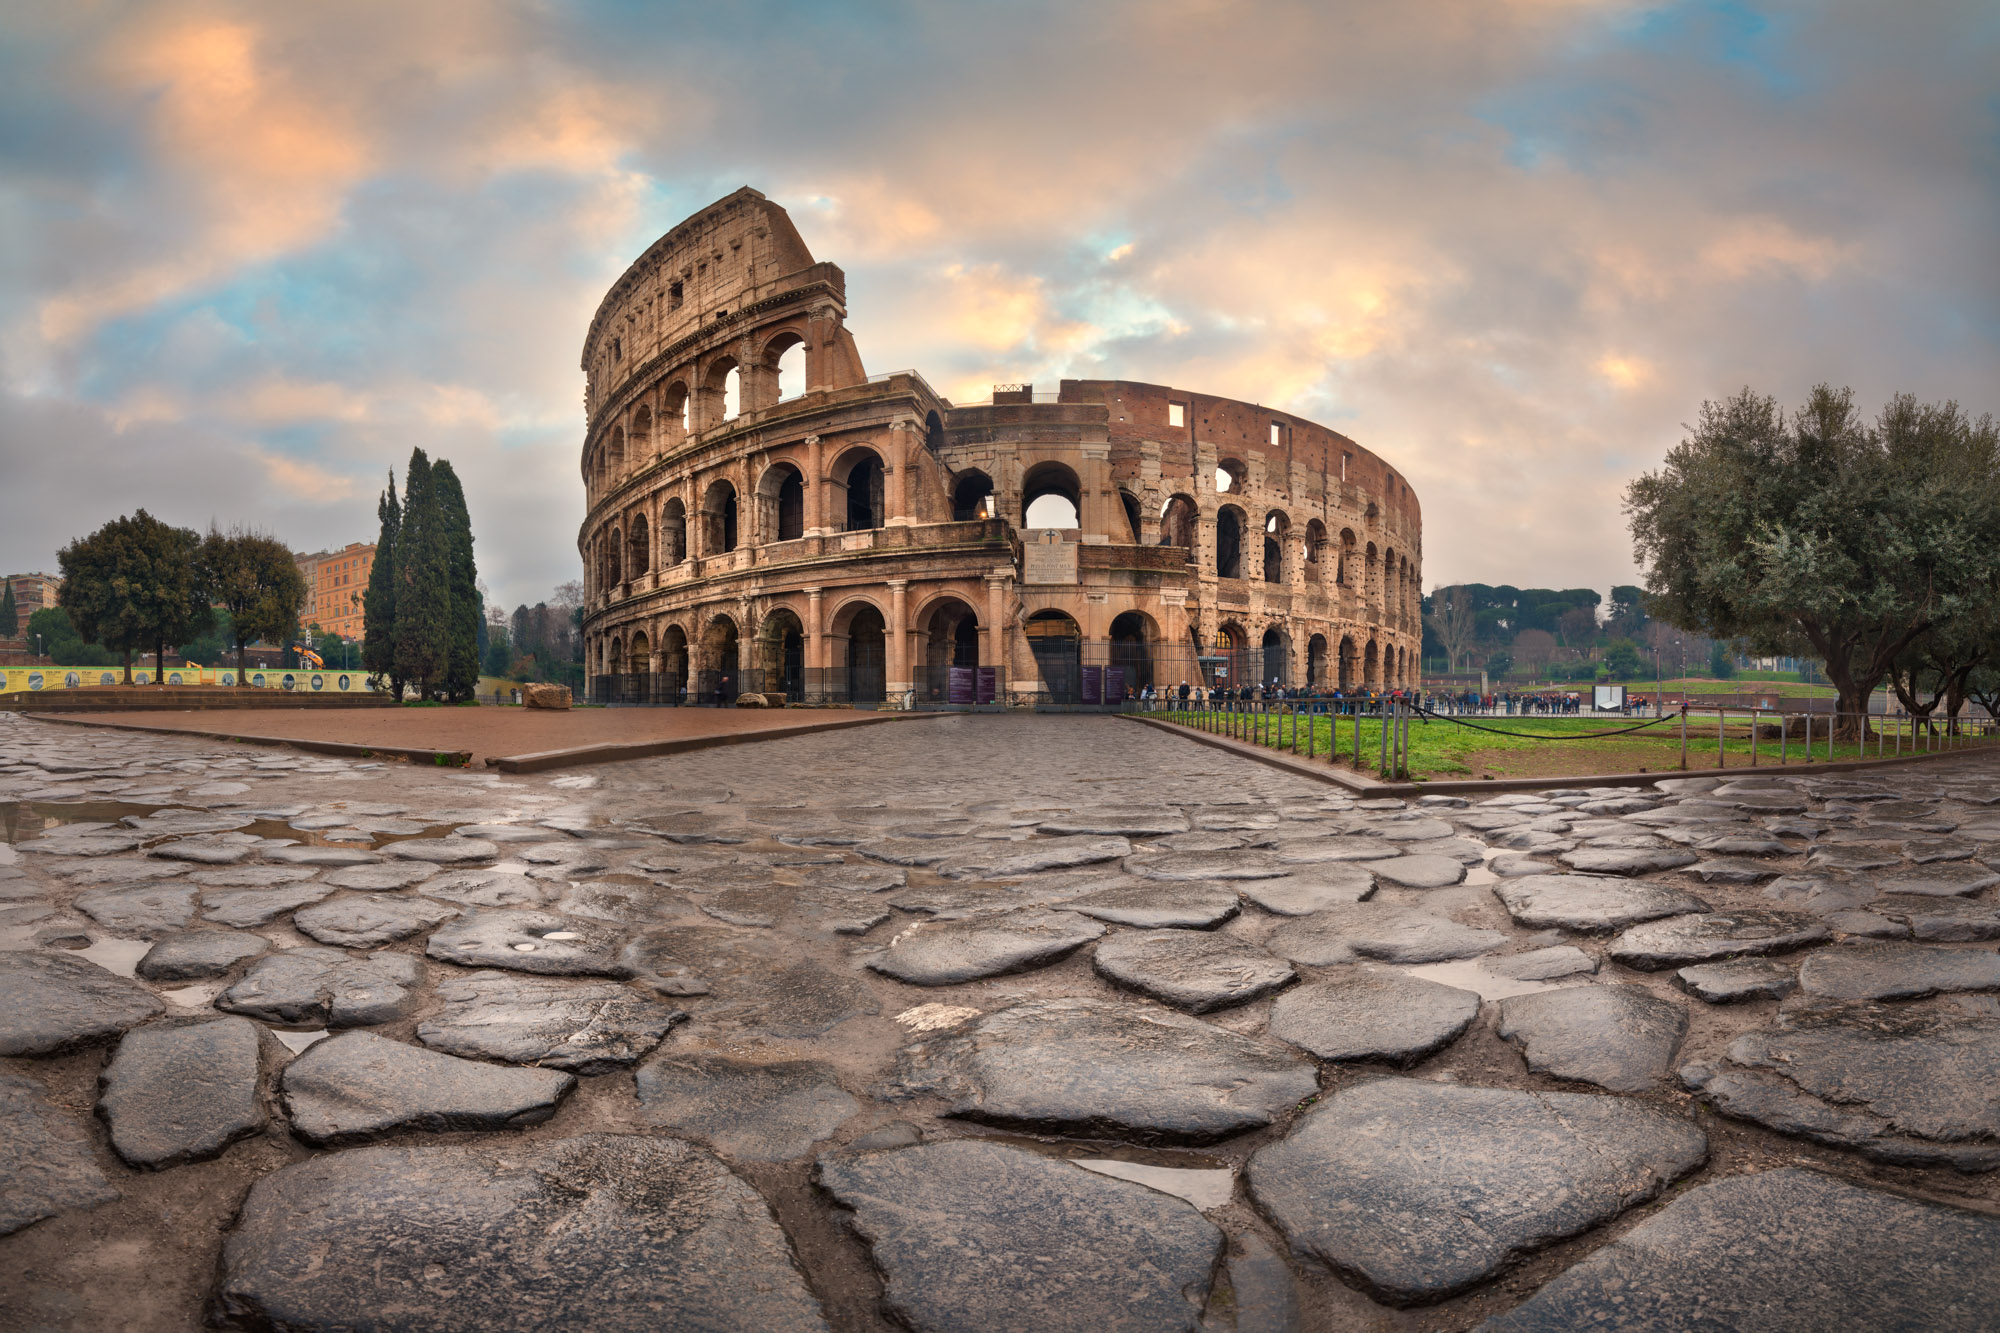 General 2000x1333 Rome Italy Europe Colosseum photography landmark architecture